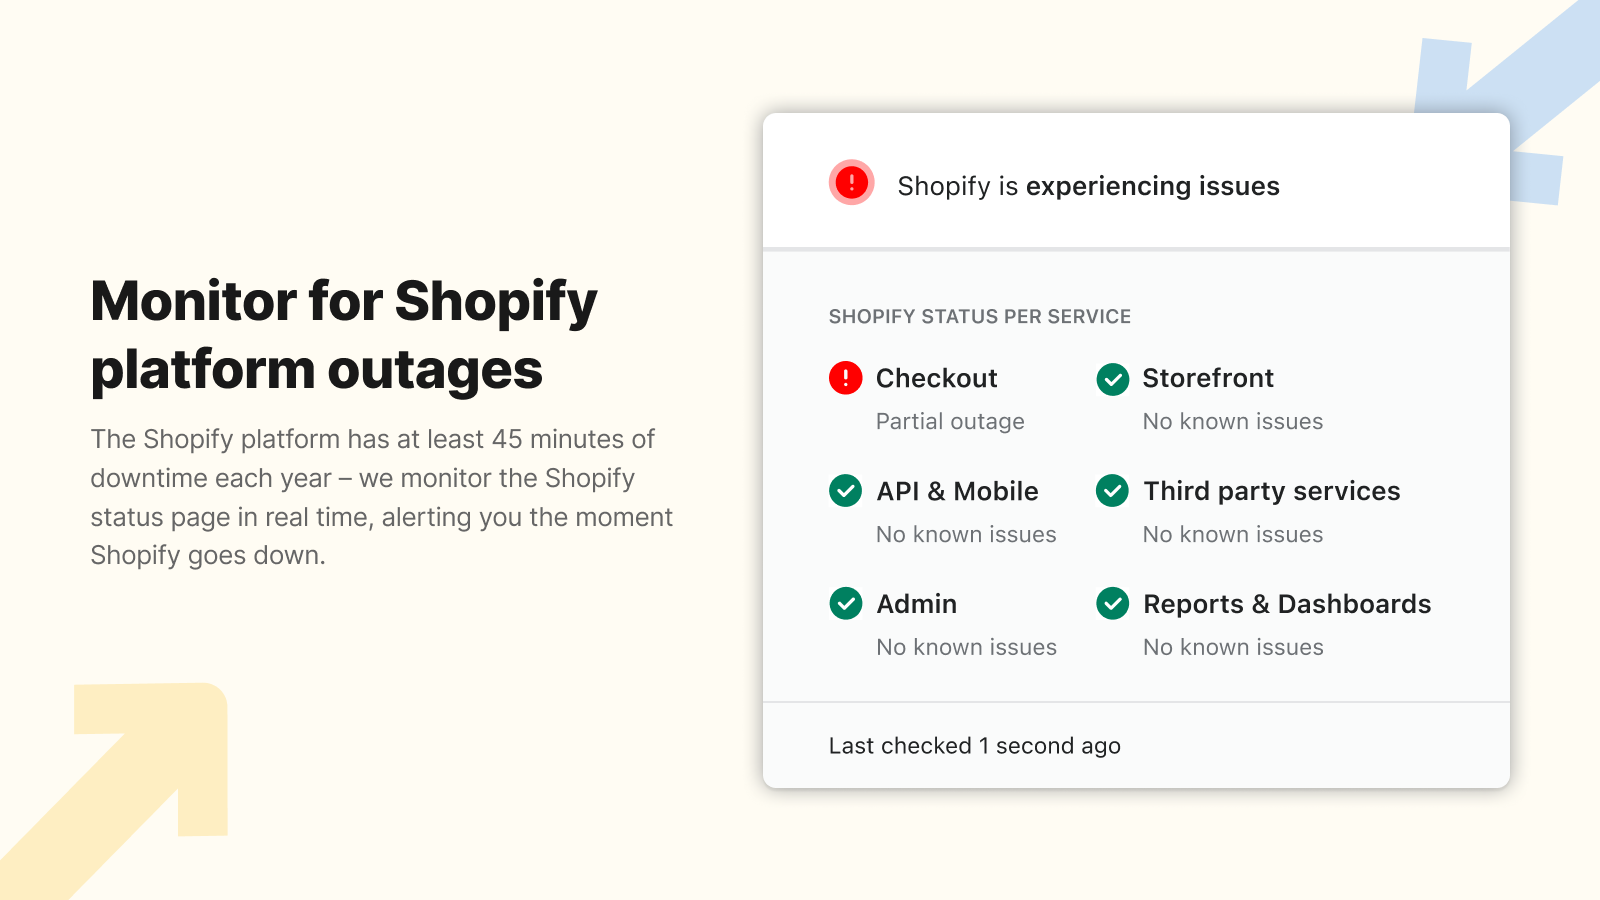 Monitor platform status to know if the Shopify platform is down